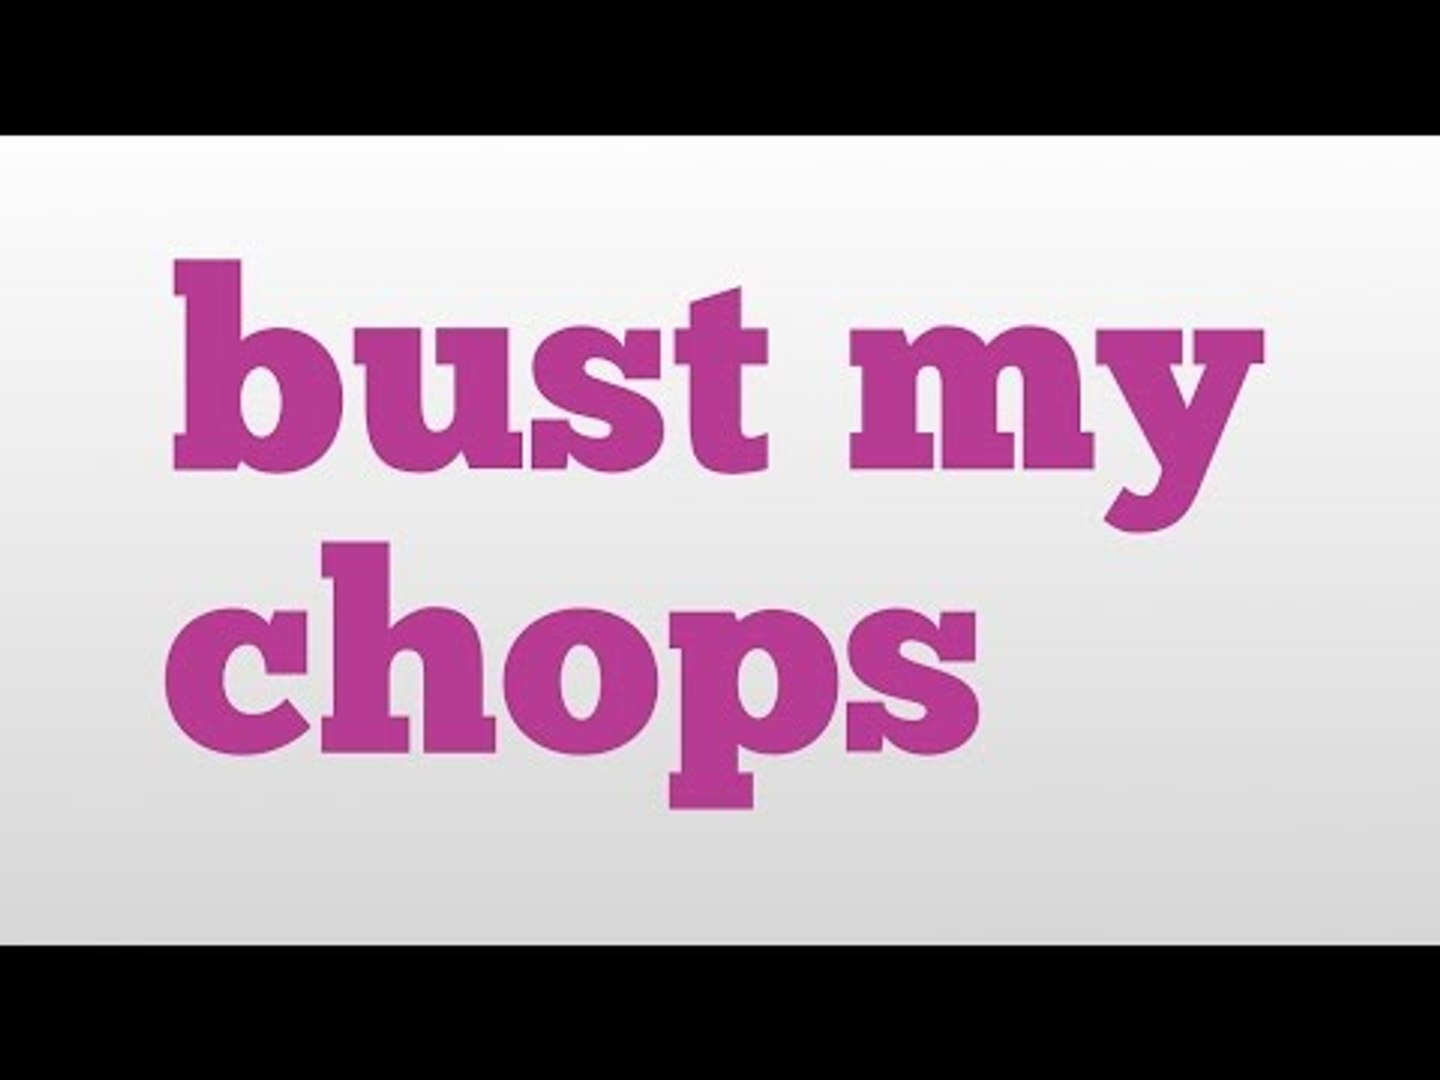 bust my chops meaning and pronunciation - video Dailymotion